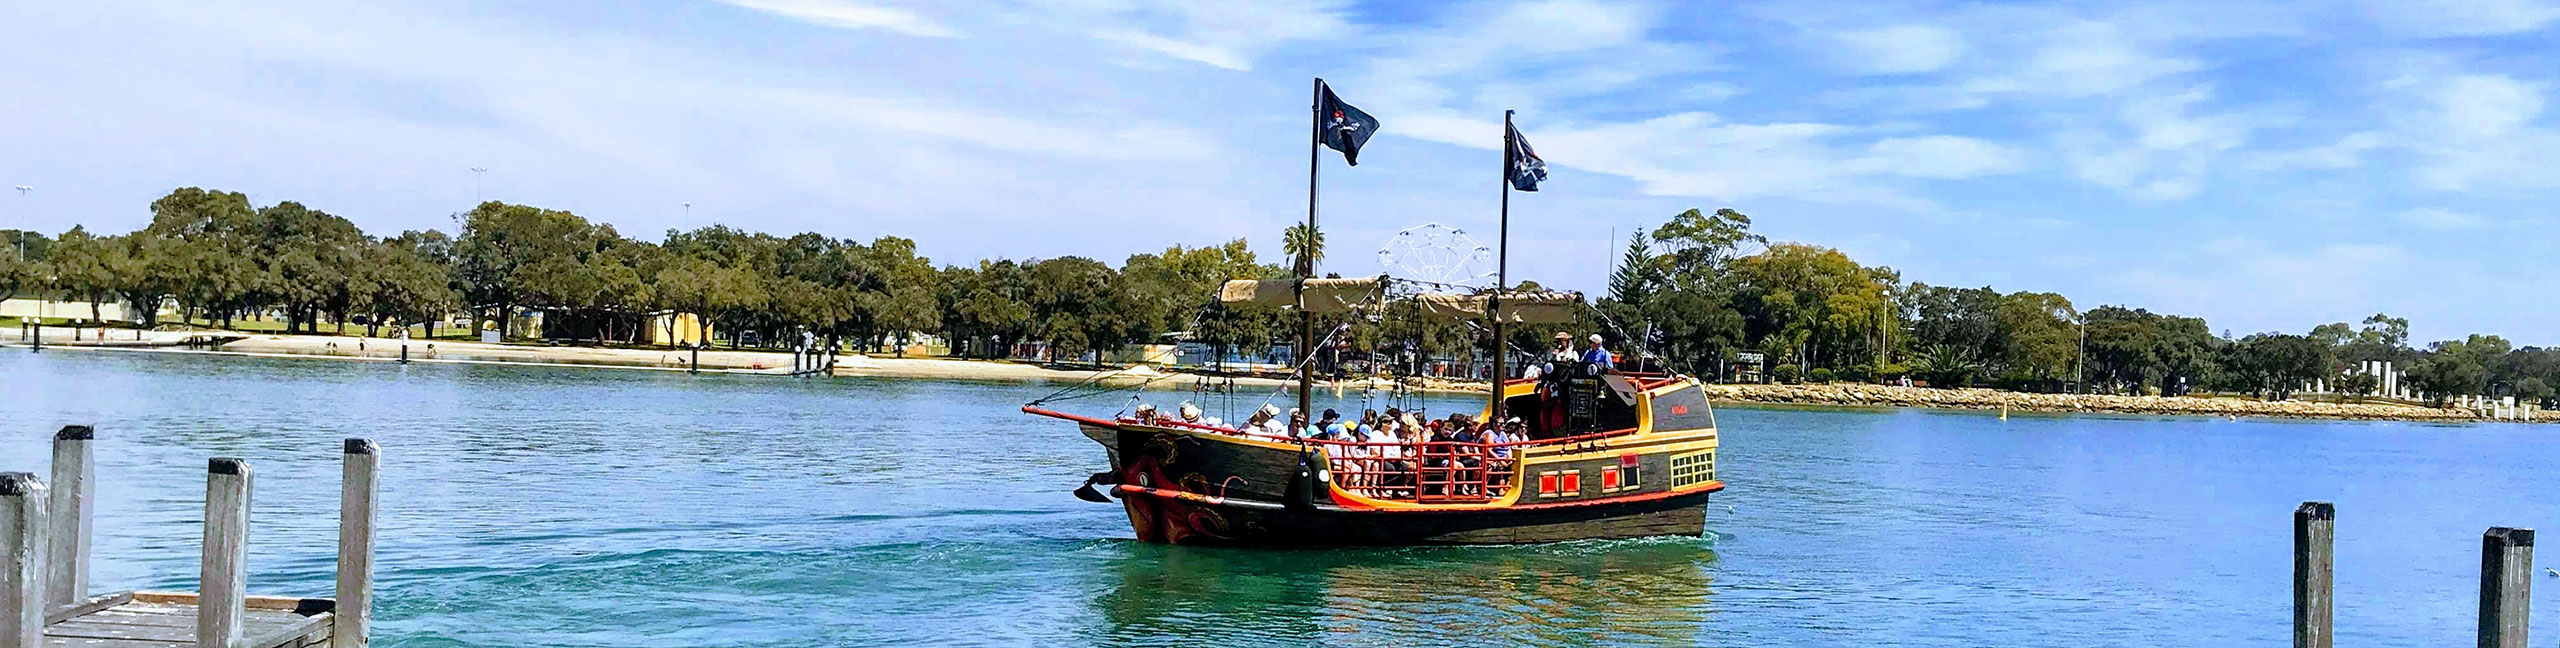 Pirate Ship approaching the jetty